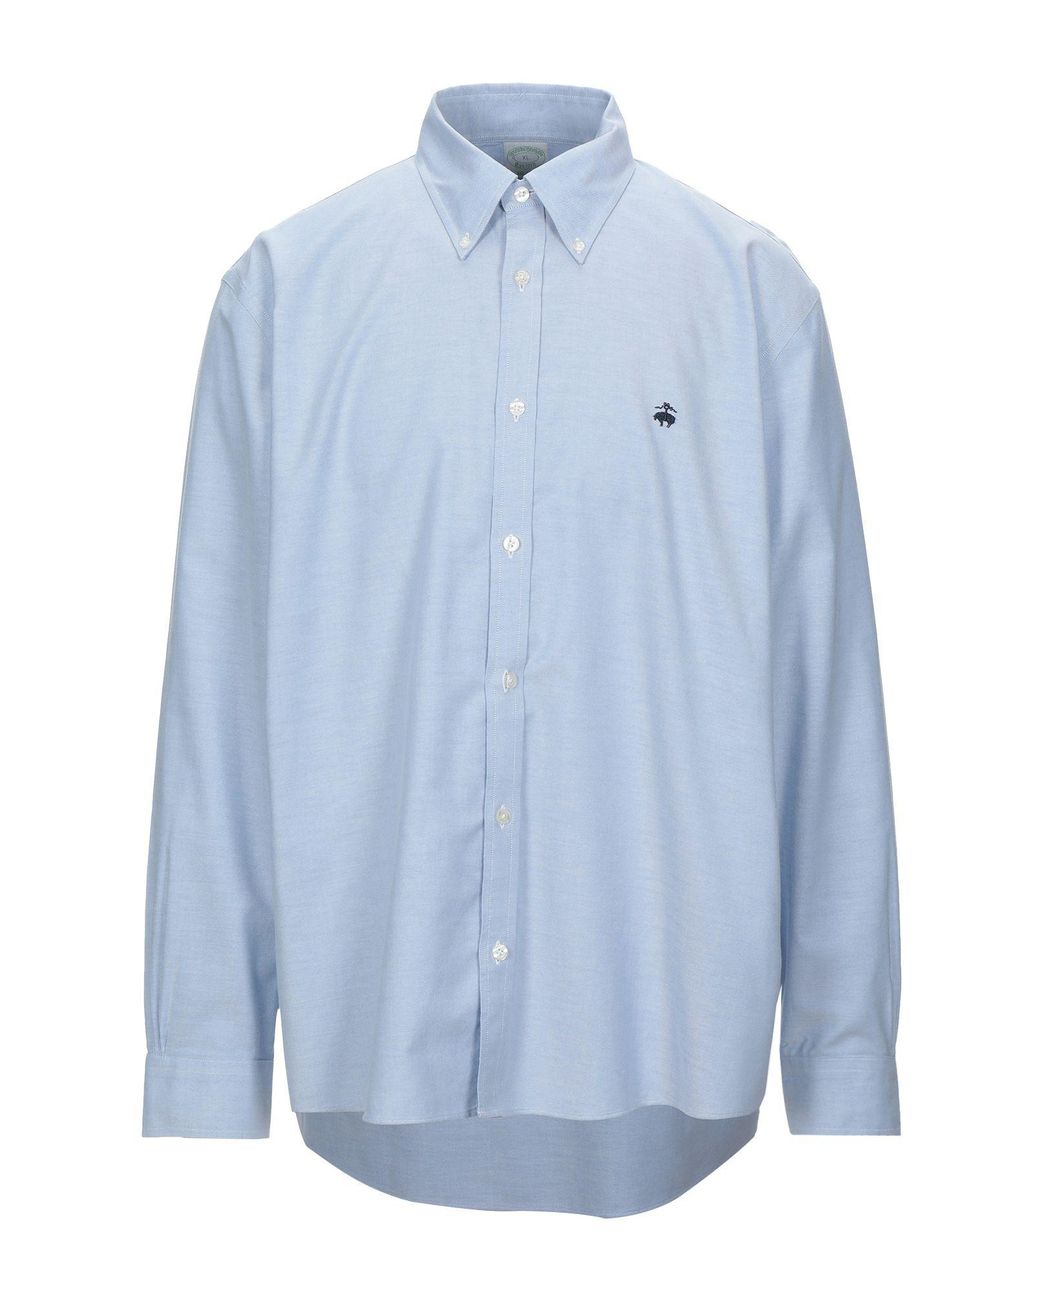 Brooks Brothers Shirt in Sky Blue (Blue) for Men - Lyst